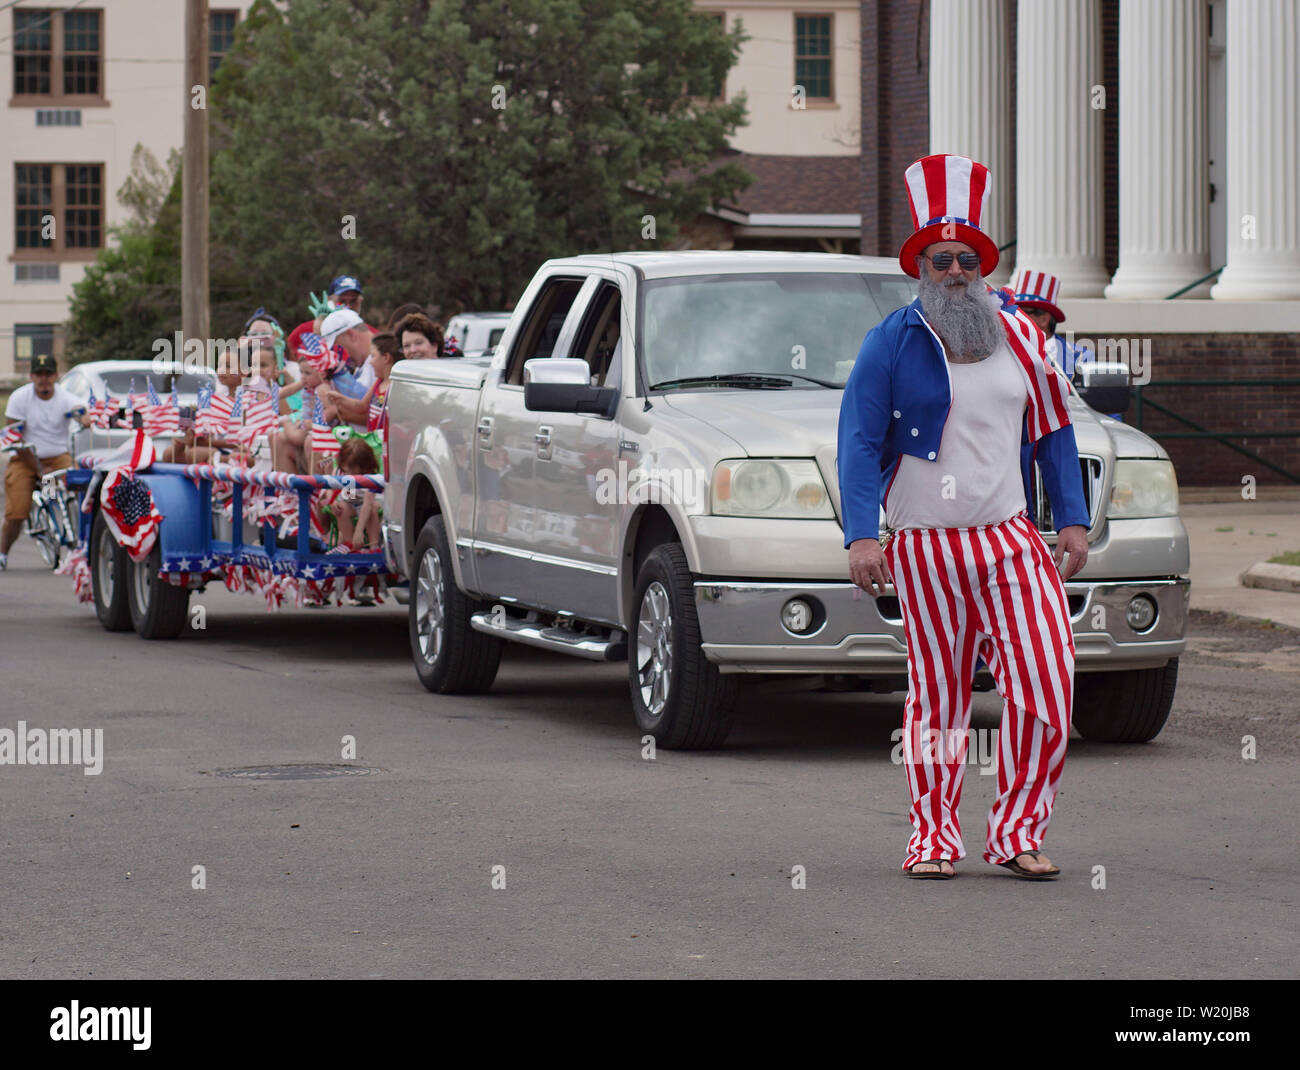 Independence Day, 4th of July parade in Alpine, a small town in Texas